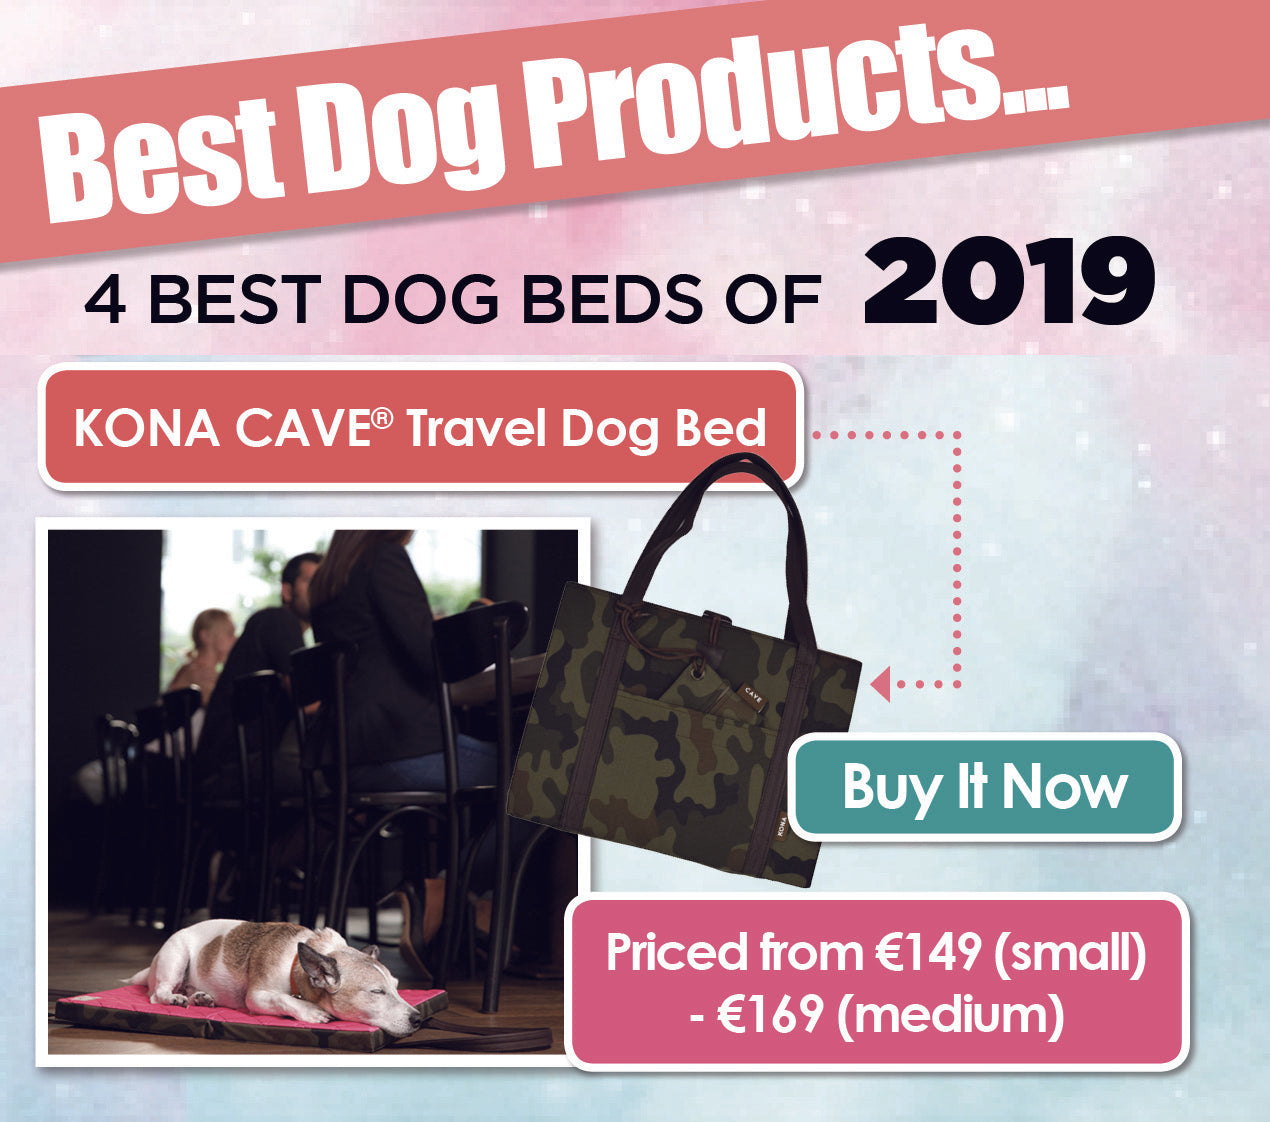 KONA CAVE® voted best bed in K9 Magazine